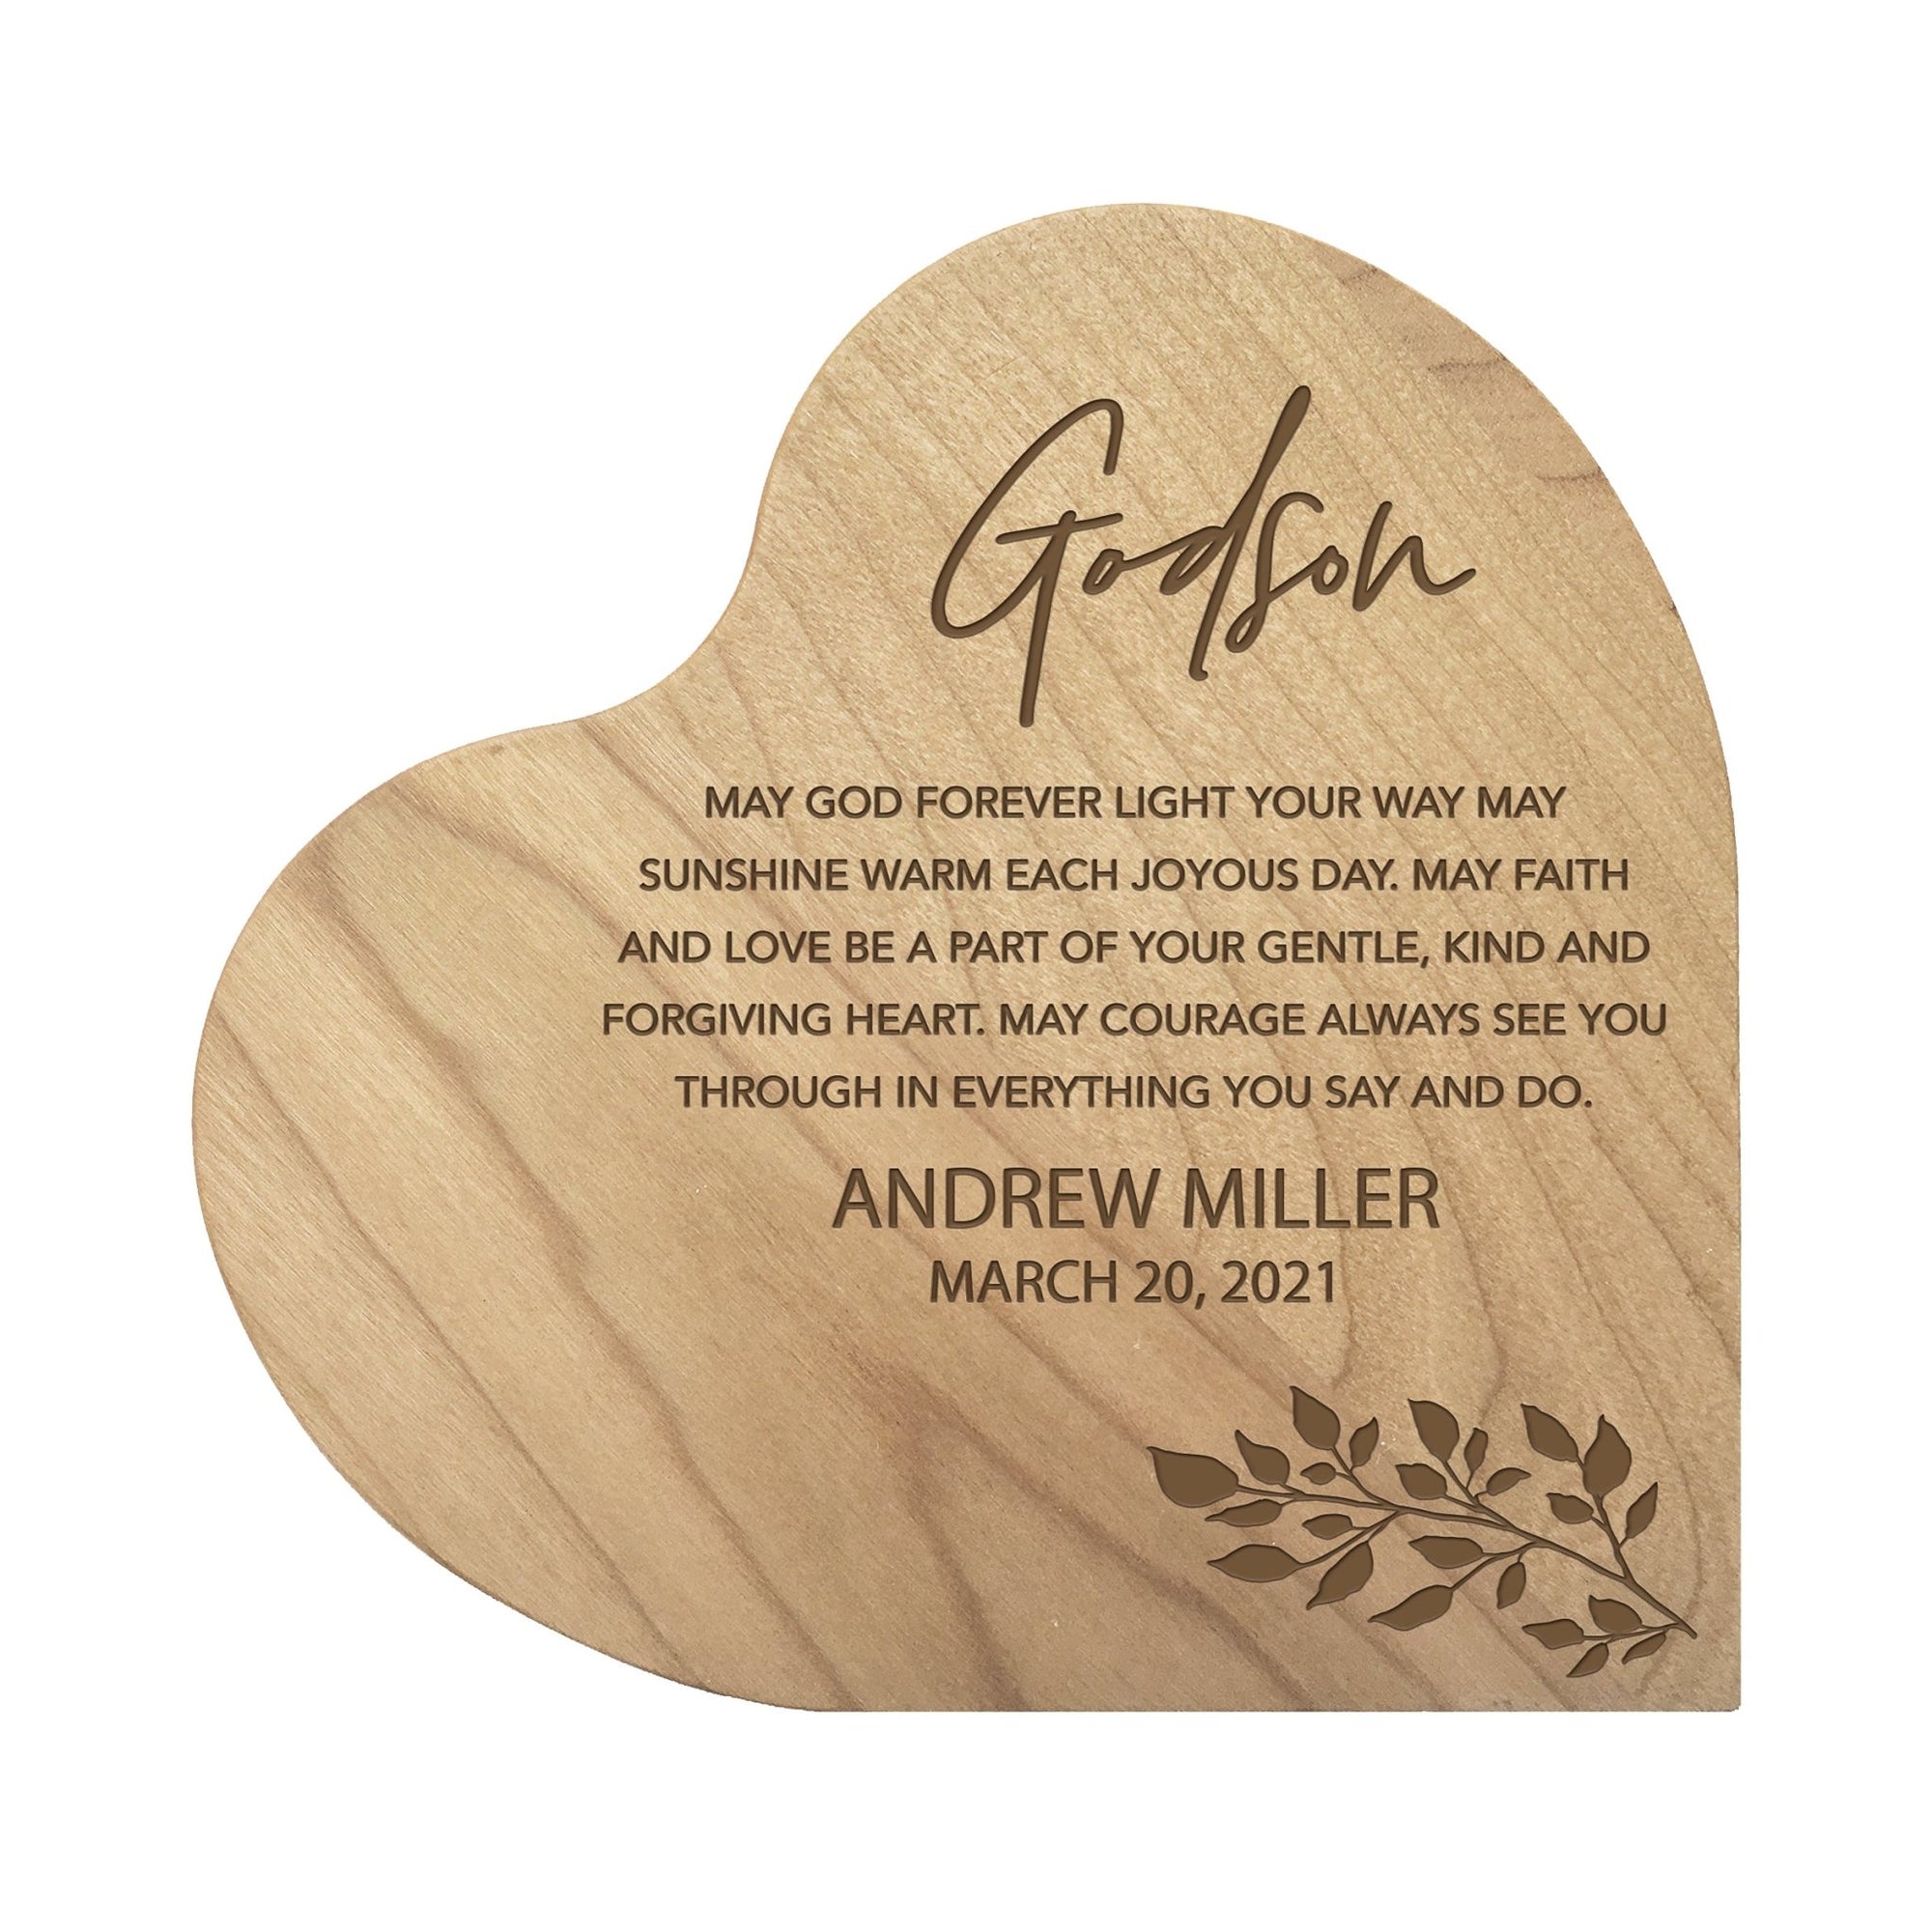 Personalized Modern Godson’s Love Solid Wood Heart Decoration With Inspirational Verse Keepsake Gift 5x5.25 - May God Forever - LifeSong Milestones